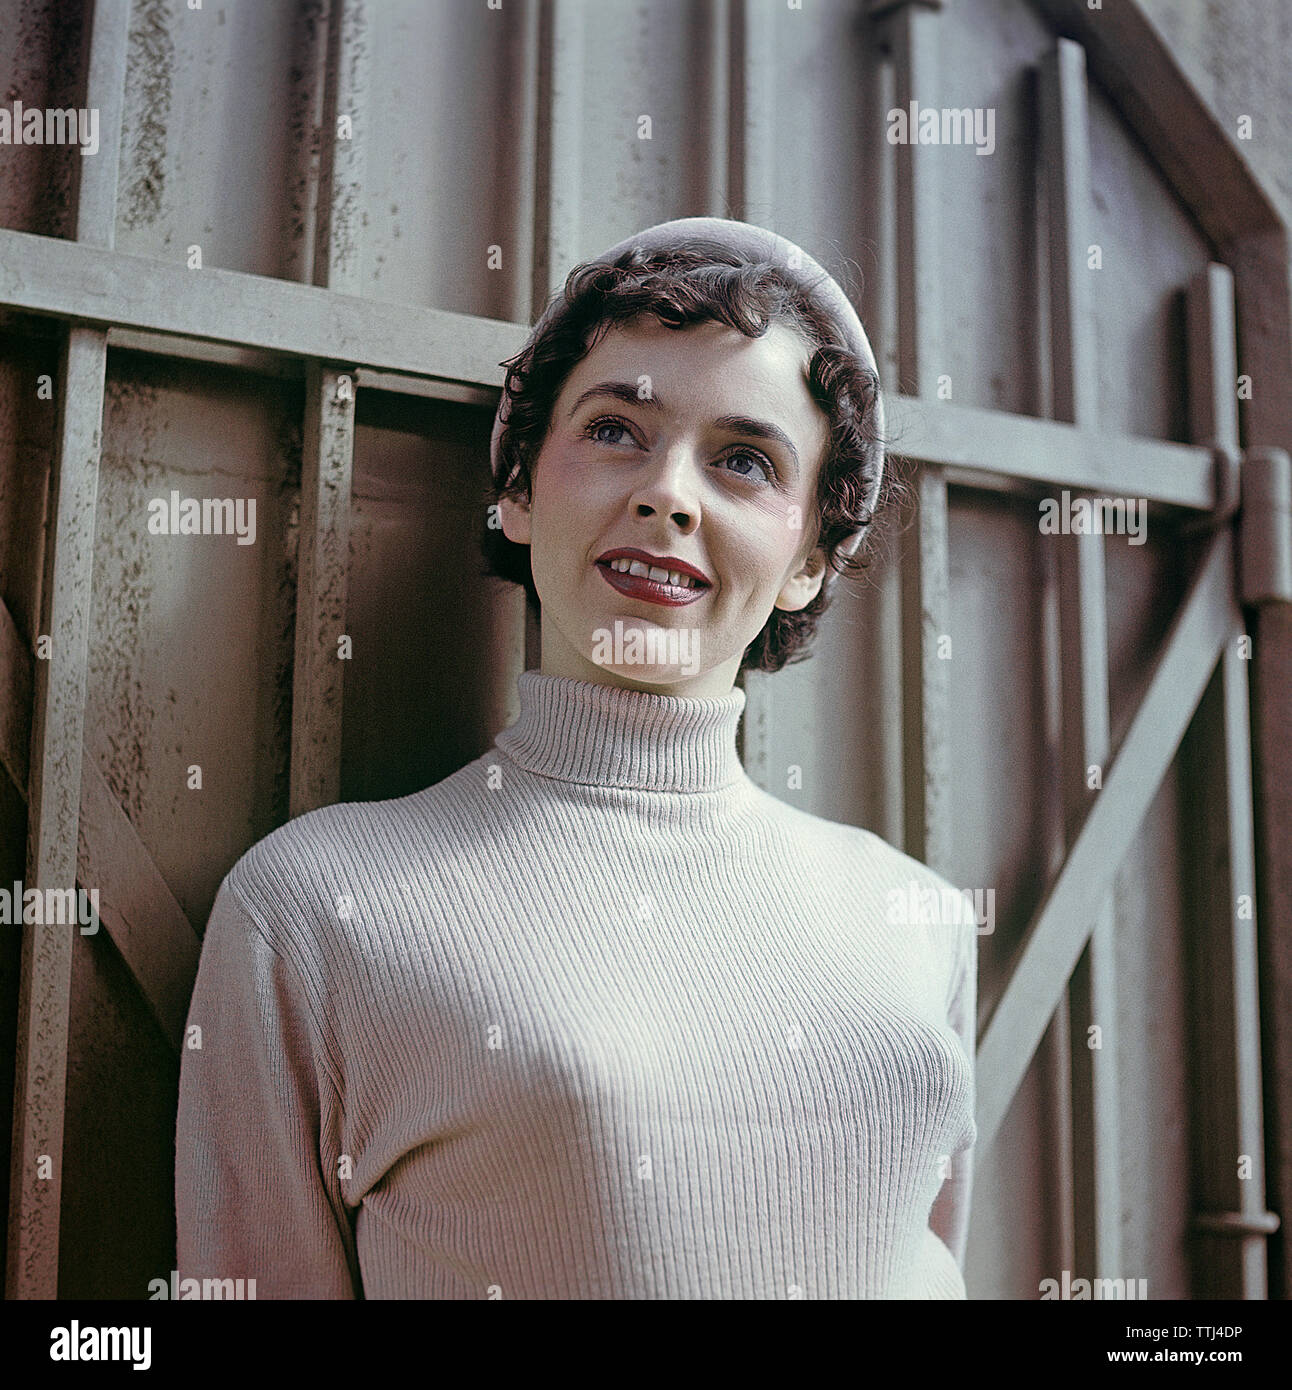 1950s jumper fashion. A swedish young woman wearing a typical 50s